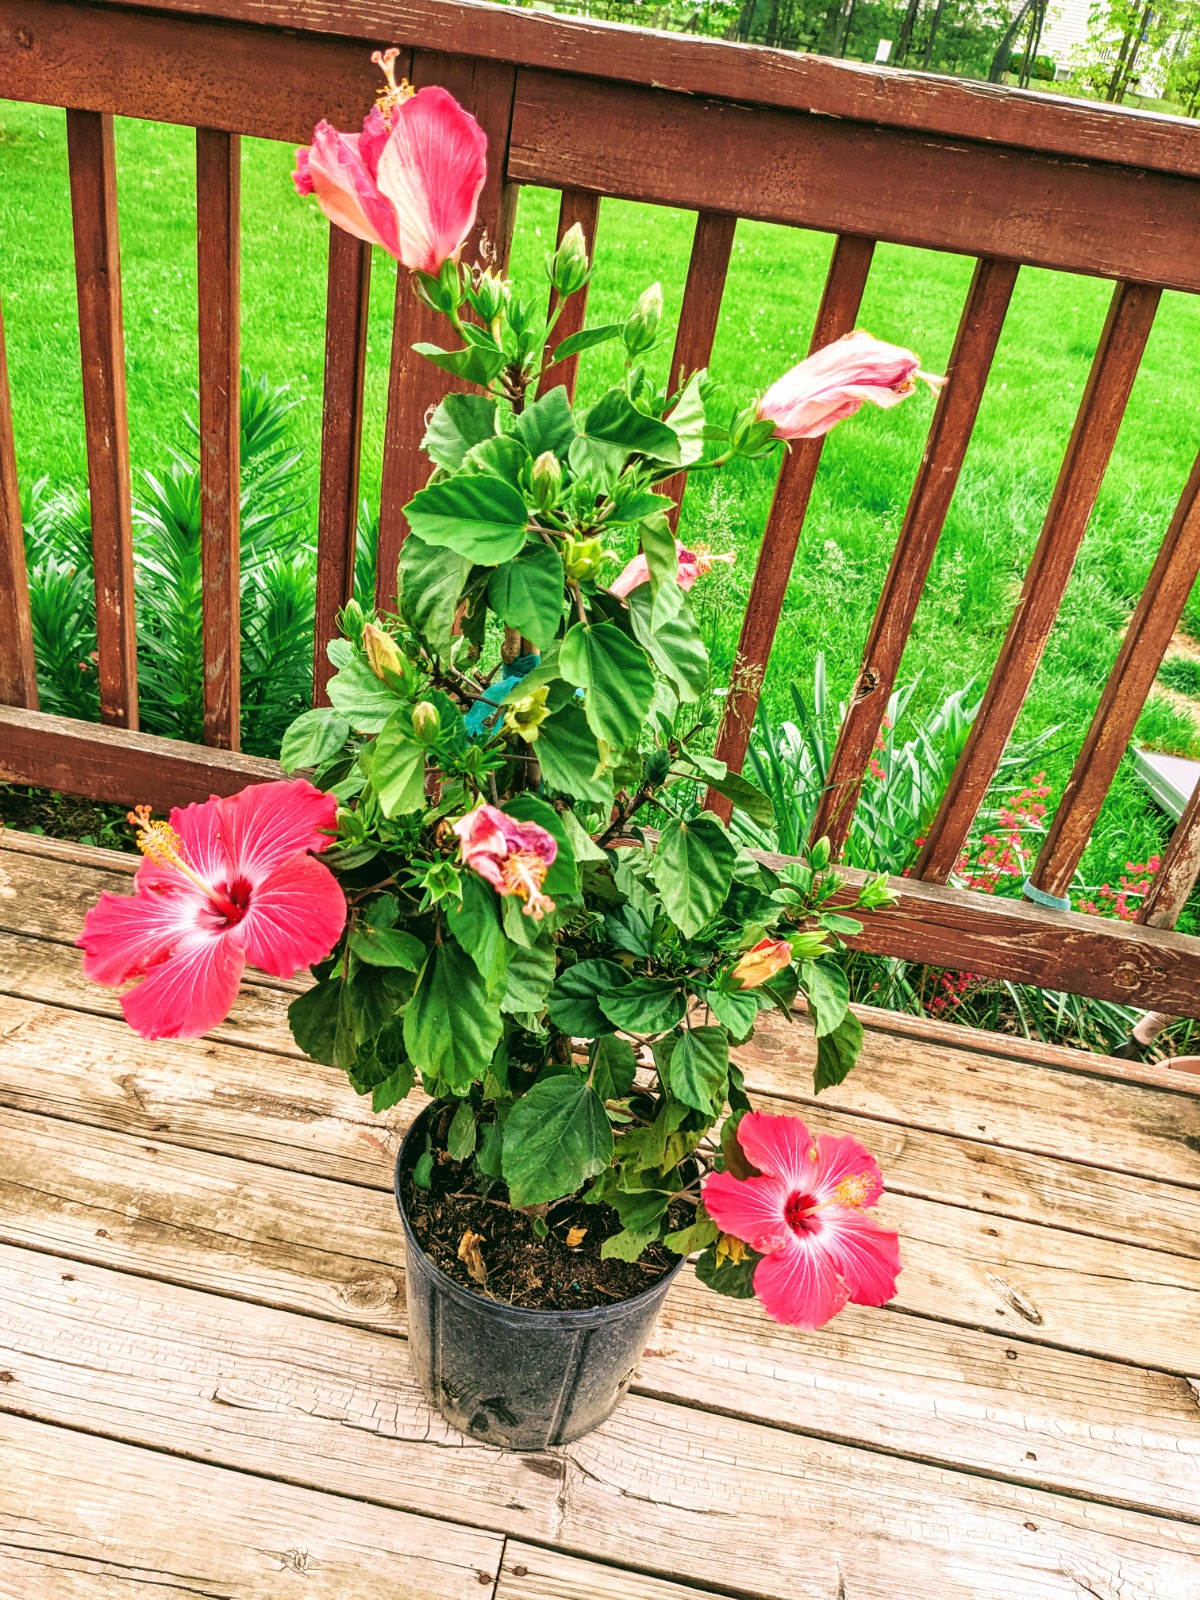 Growing Hibiscus in Pots - Pink and Red Hibiscus in nursery pot on deck